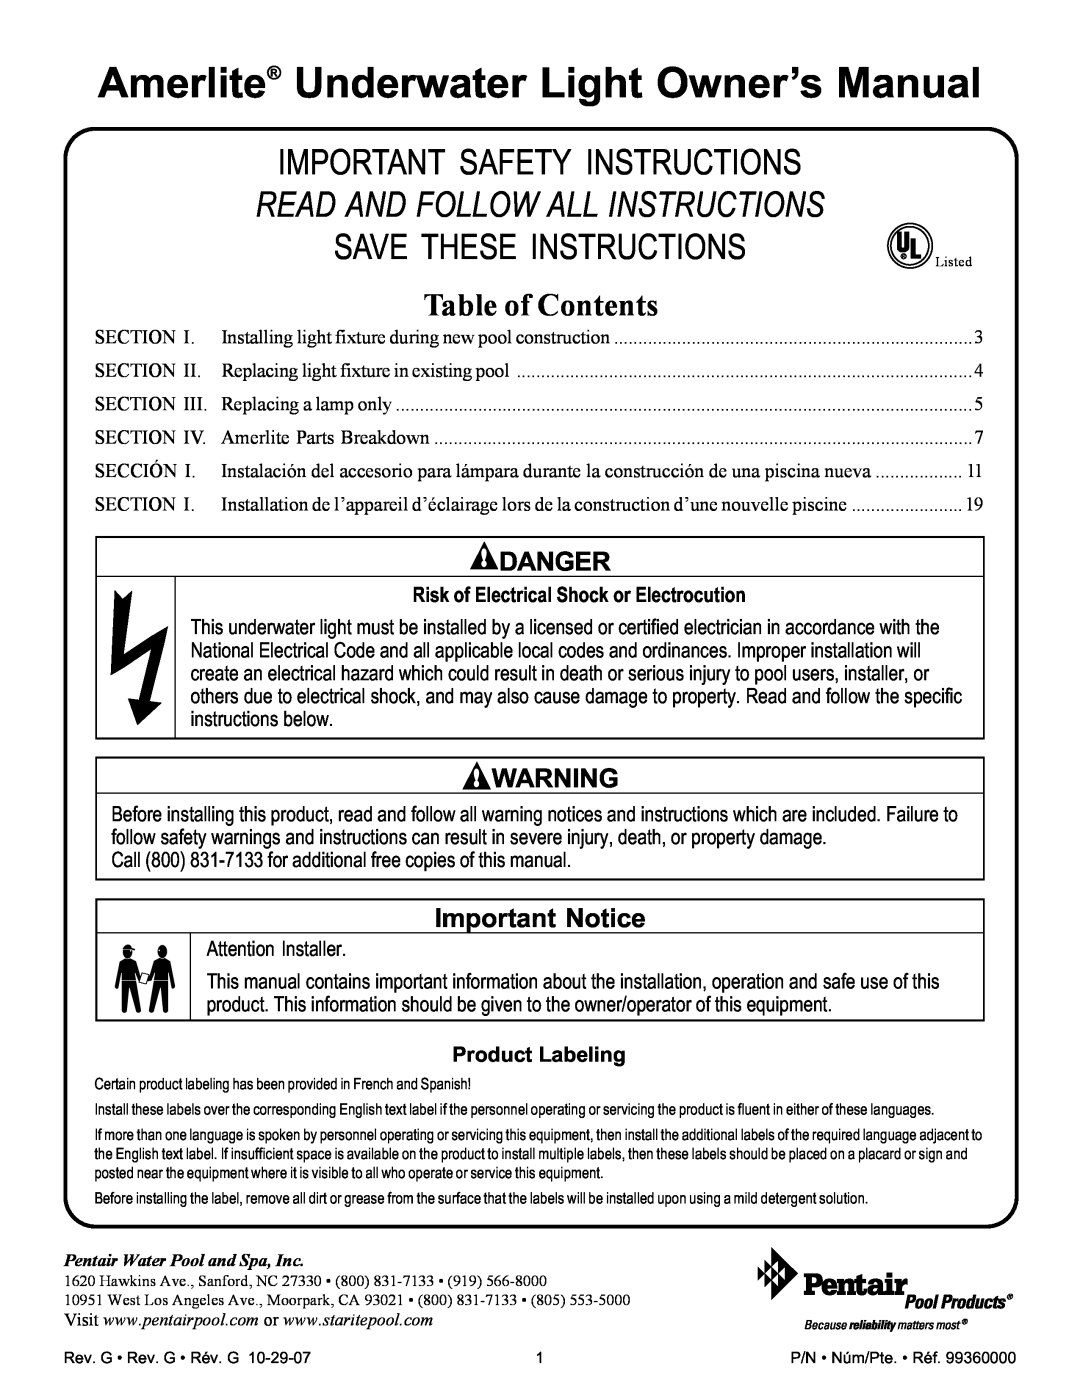 Pentair Amerlite important safety instructions Important Safety Instructions, Save These Instructions, Table of Contents 